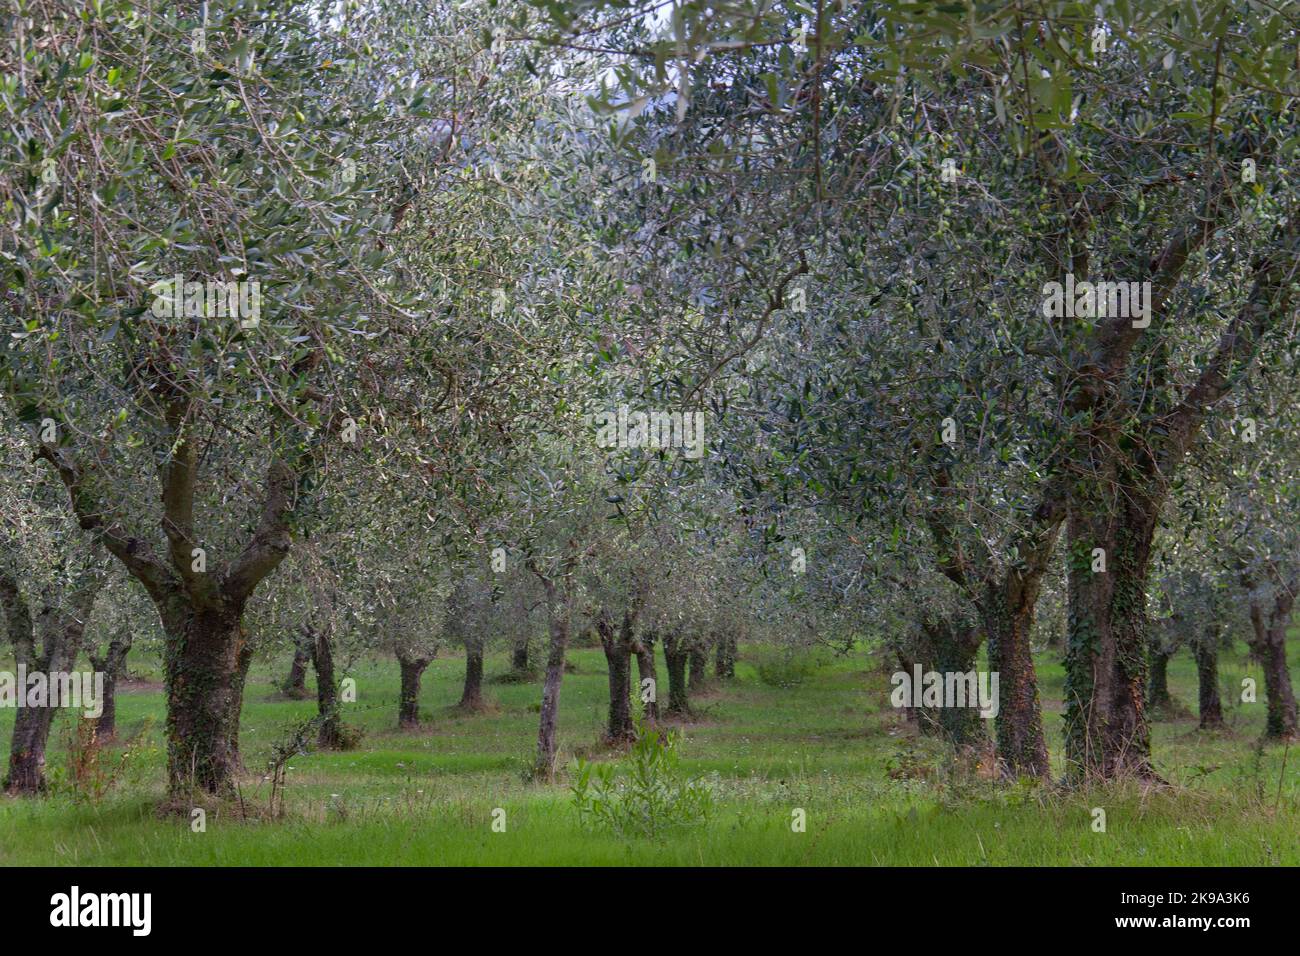 View in Olive orchard, trees in rows, silvery leaves Stock Photo